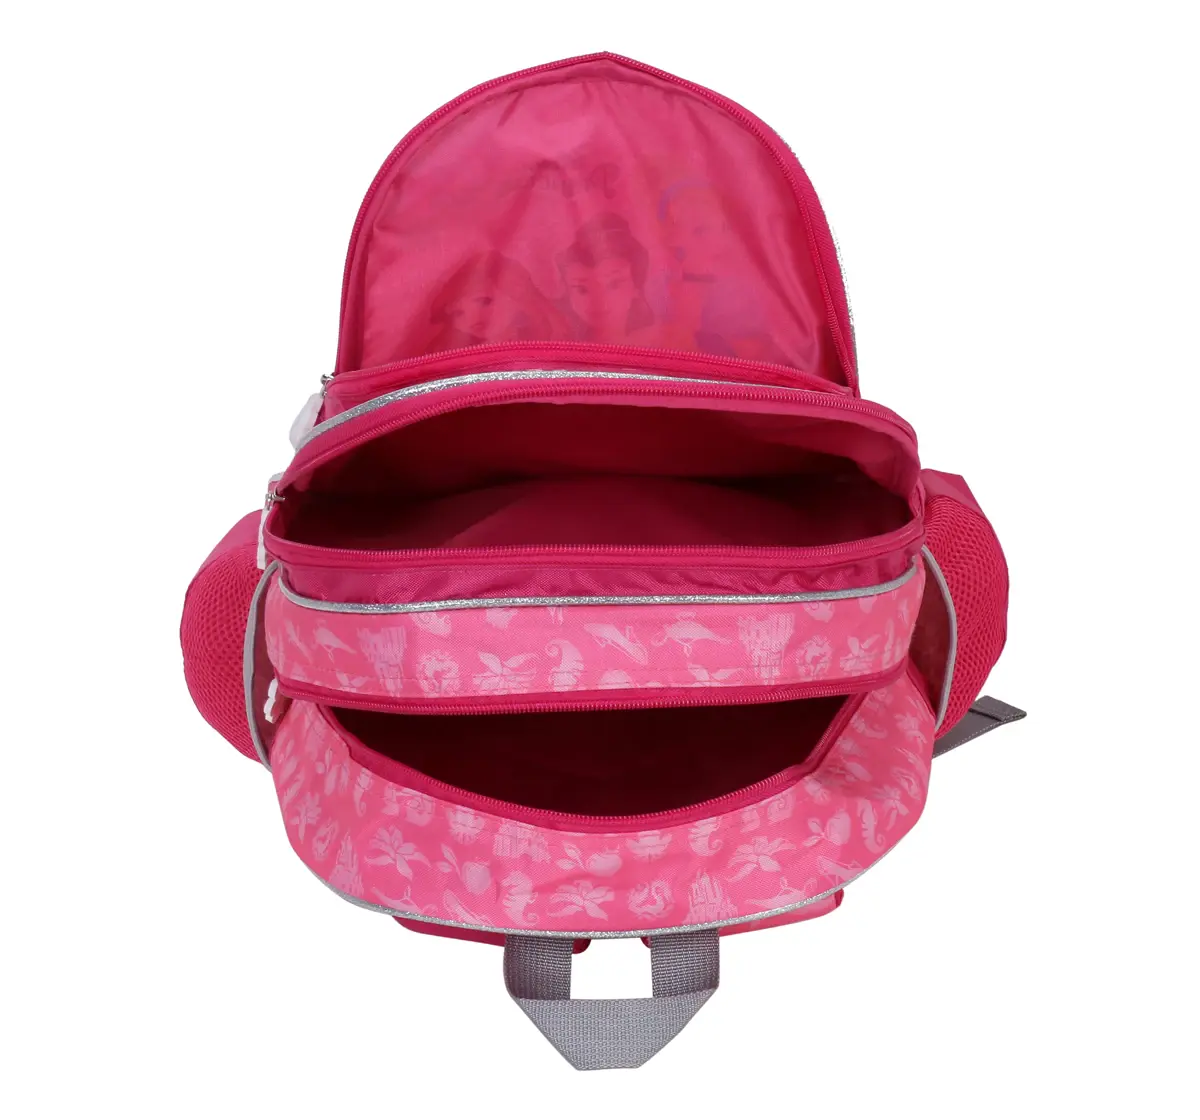 Simba Princess Find Your Fate 14 Backpack Multicolor 3Y+